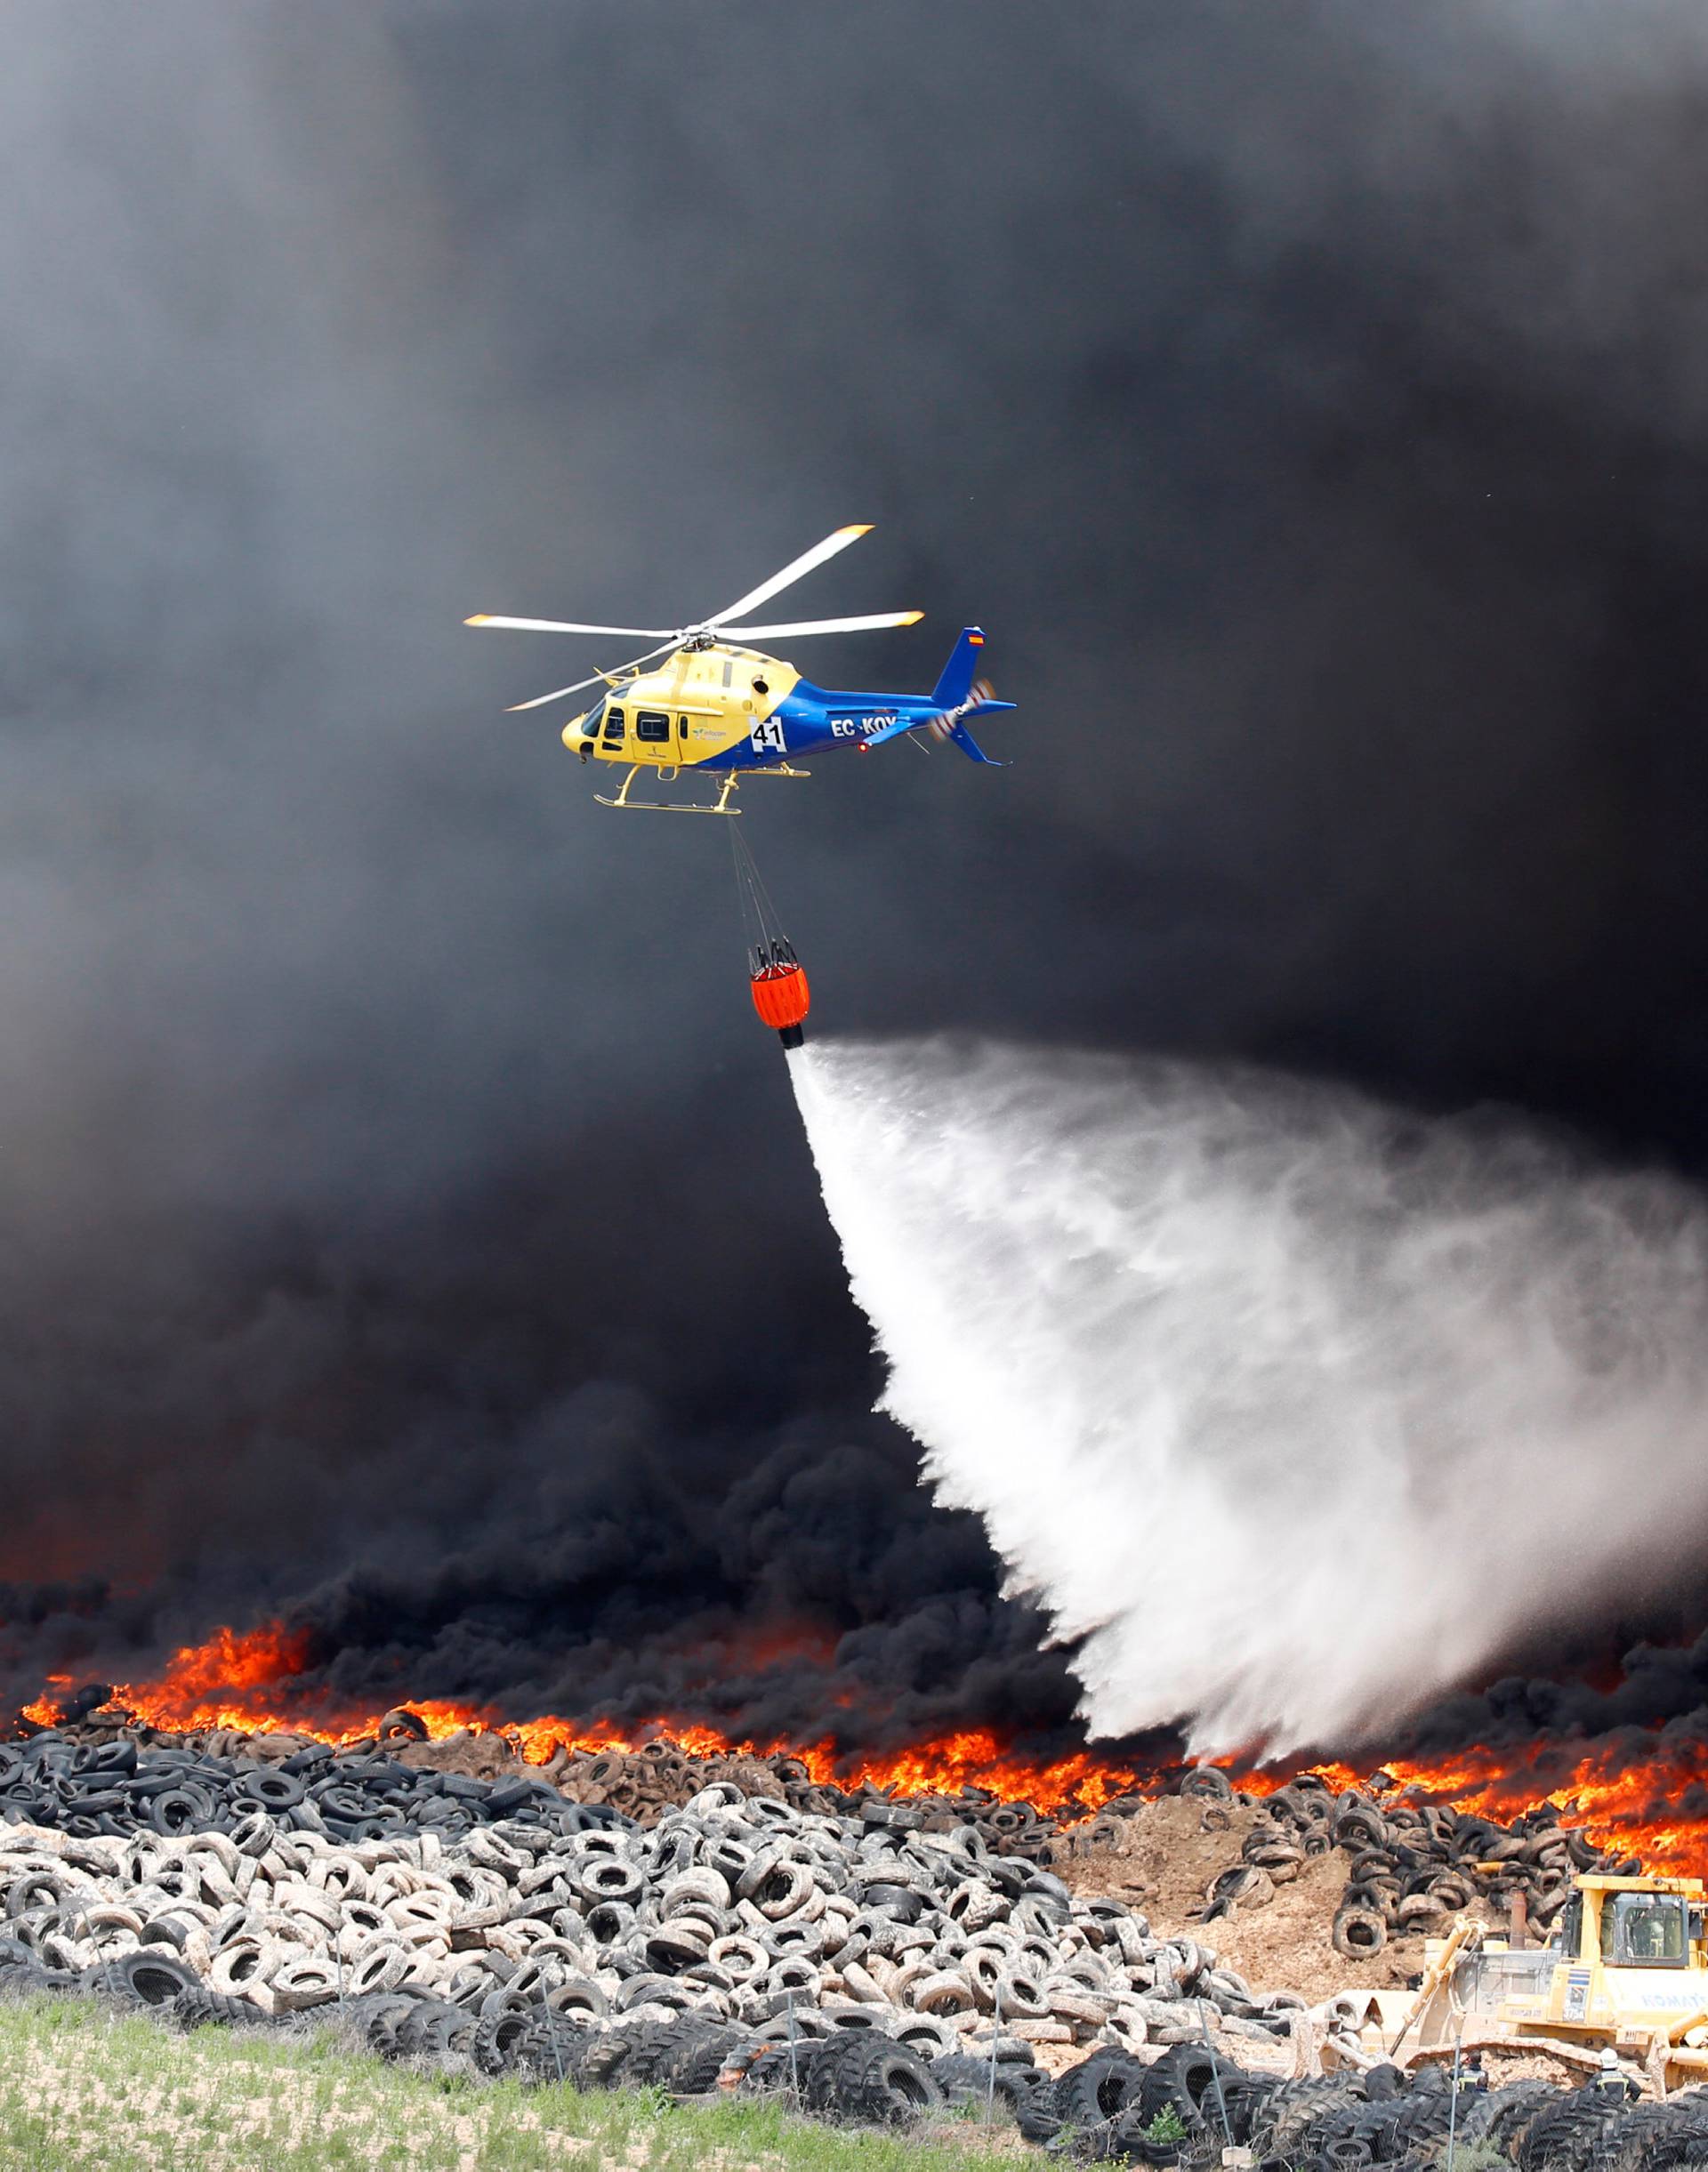 An helicopter throws water over a fire at a tire dump near a residential development in Sesena